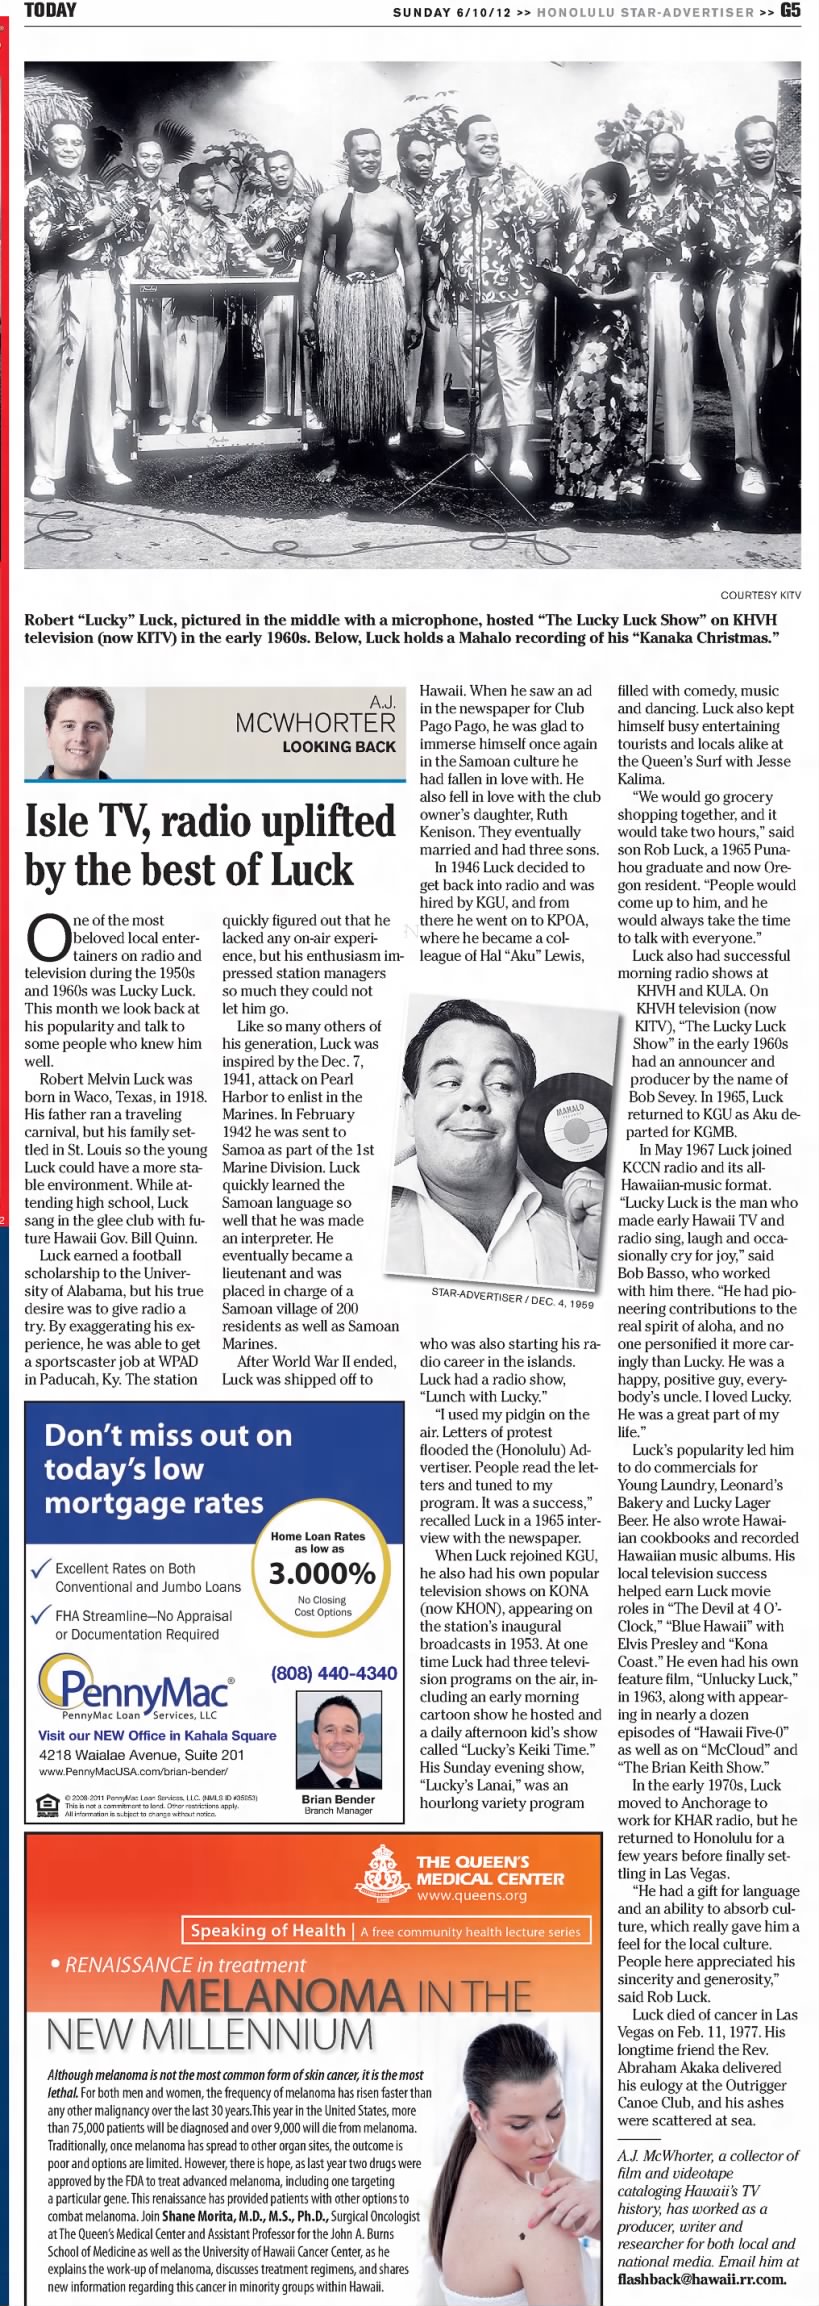 Isle TV, radio uplifted by the best of Luck